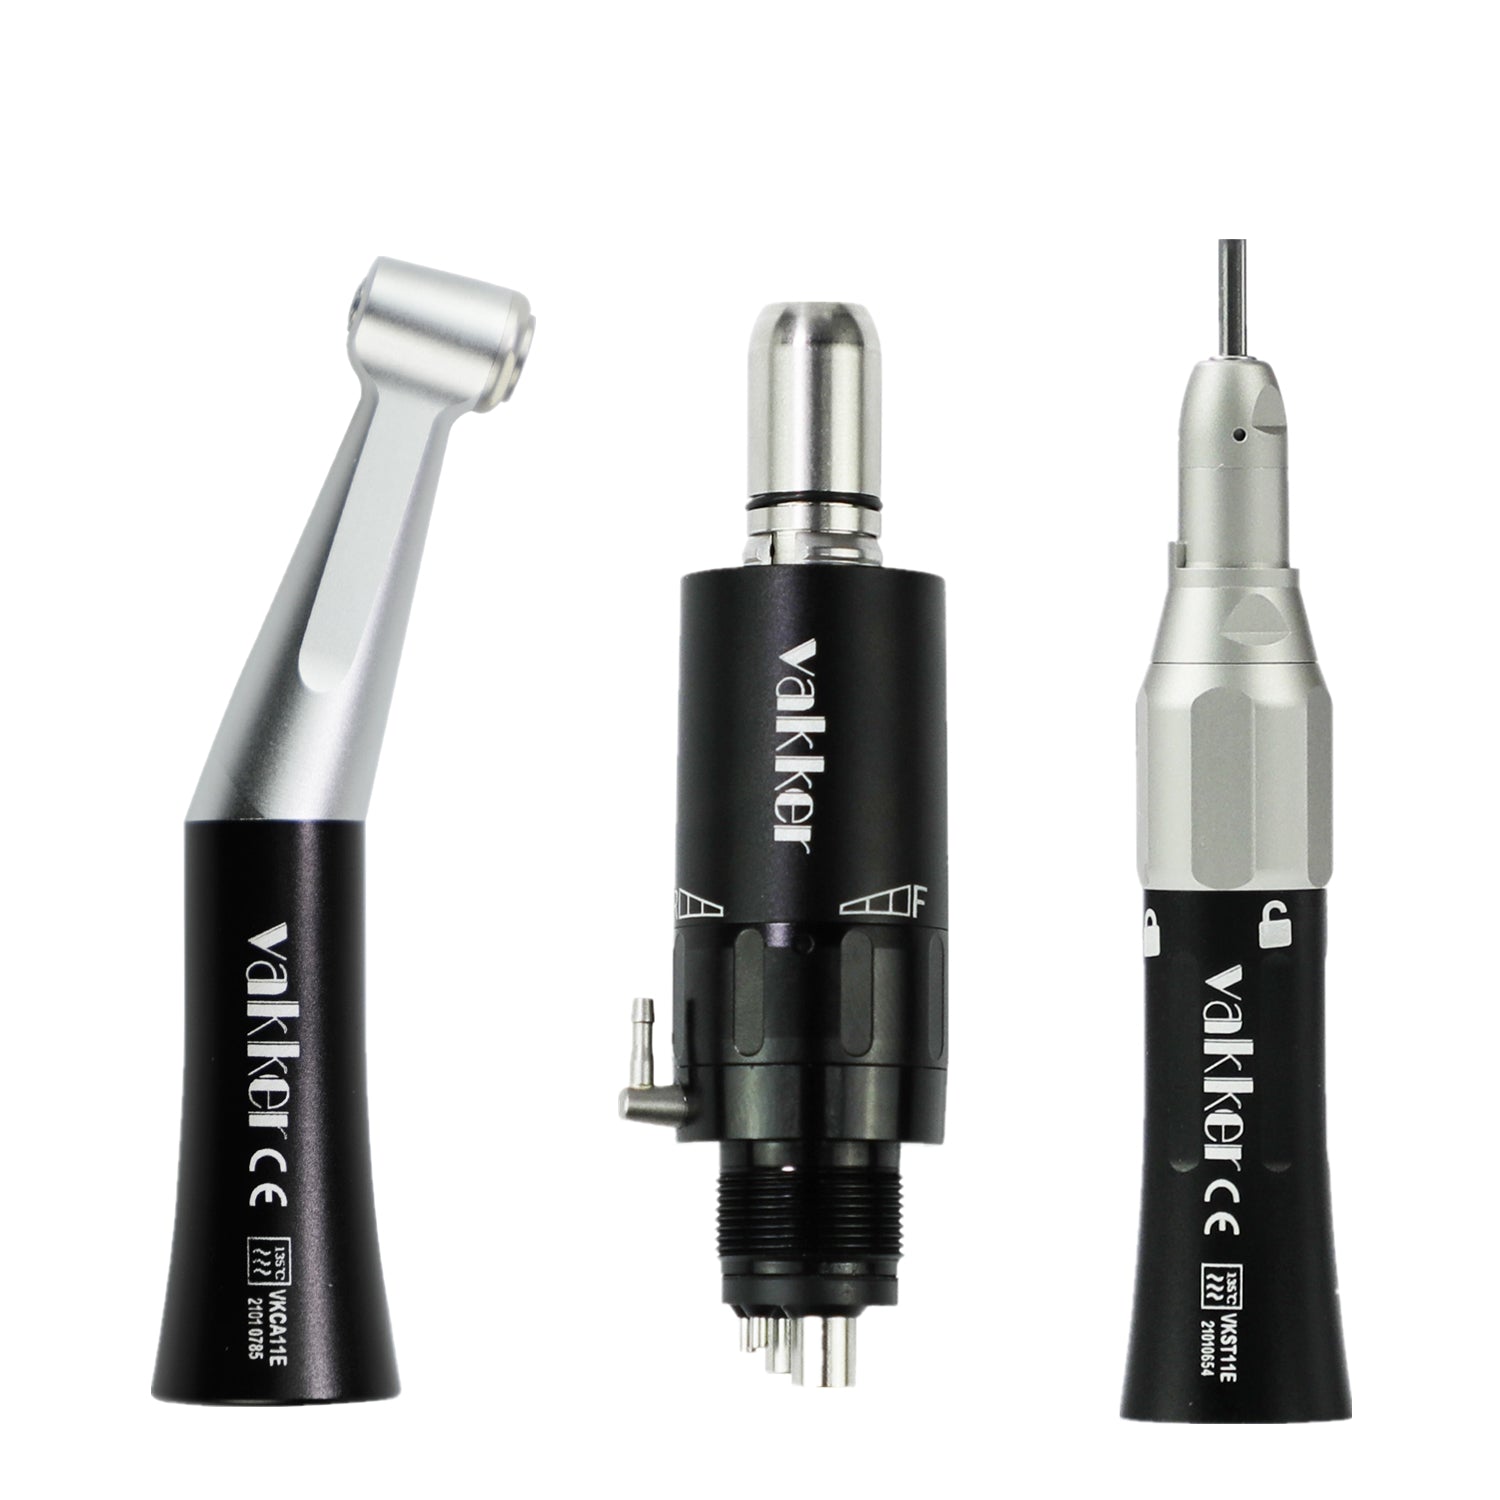 Dental Low Speed Contra Angle Handpiece Air Motor Straight Nosecone NSK  Style - AbuMaizar Dental Roots Clinic